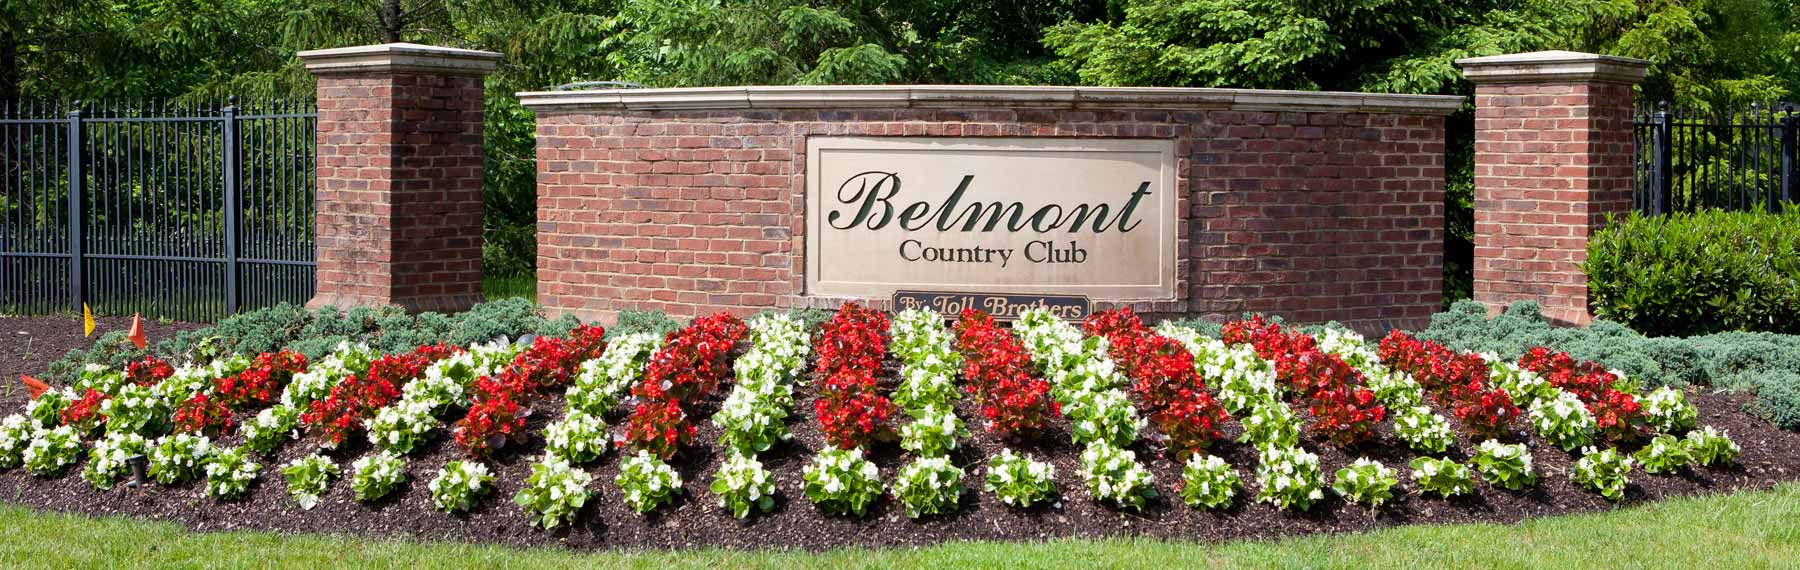 Belmont Country Club Real Estate